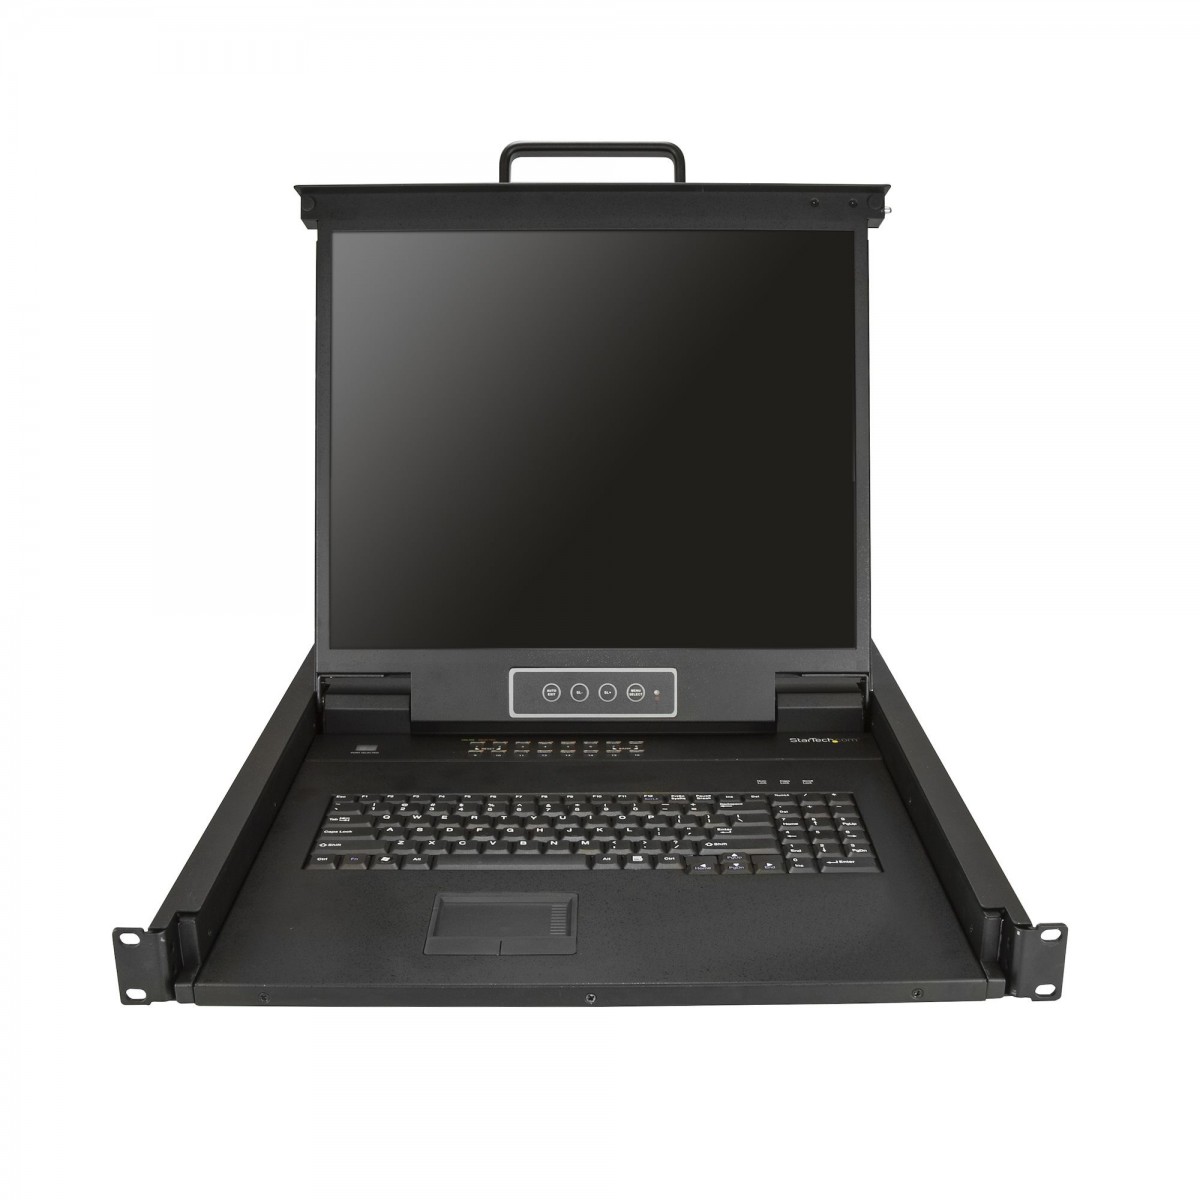 StarTech.com 16 Port Rackmount KVM Console w/ 6ft Cables - Integrated KVM Switch w/ 19" LCD Monitor - Fully Featured 1U LCD KVM 